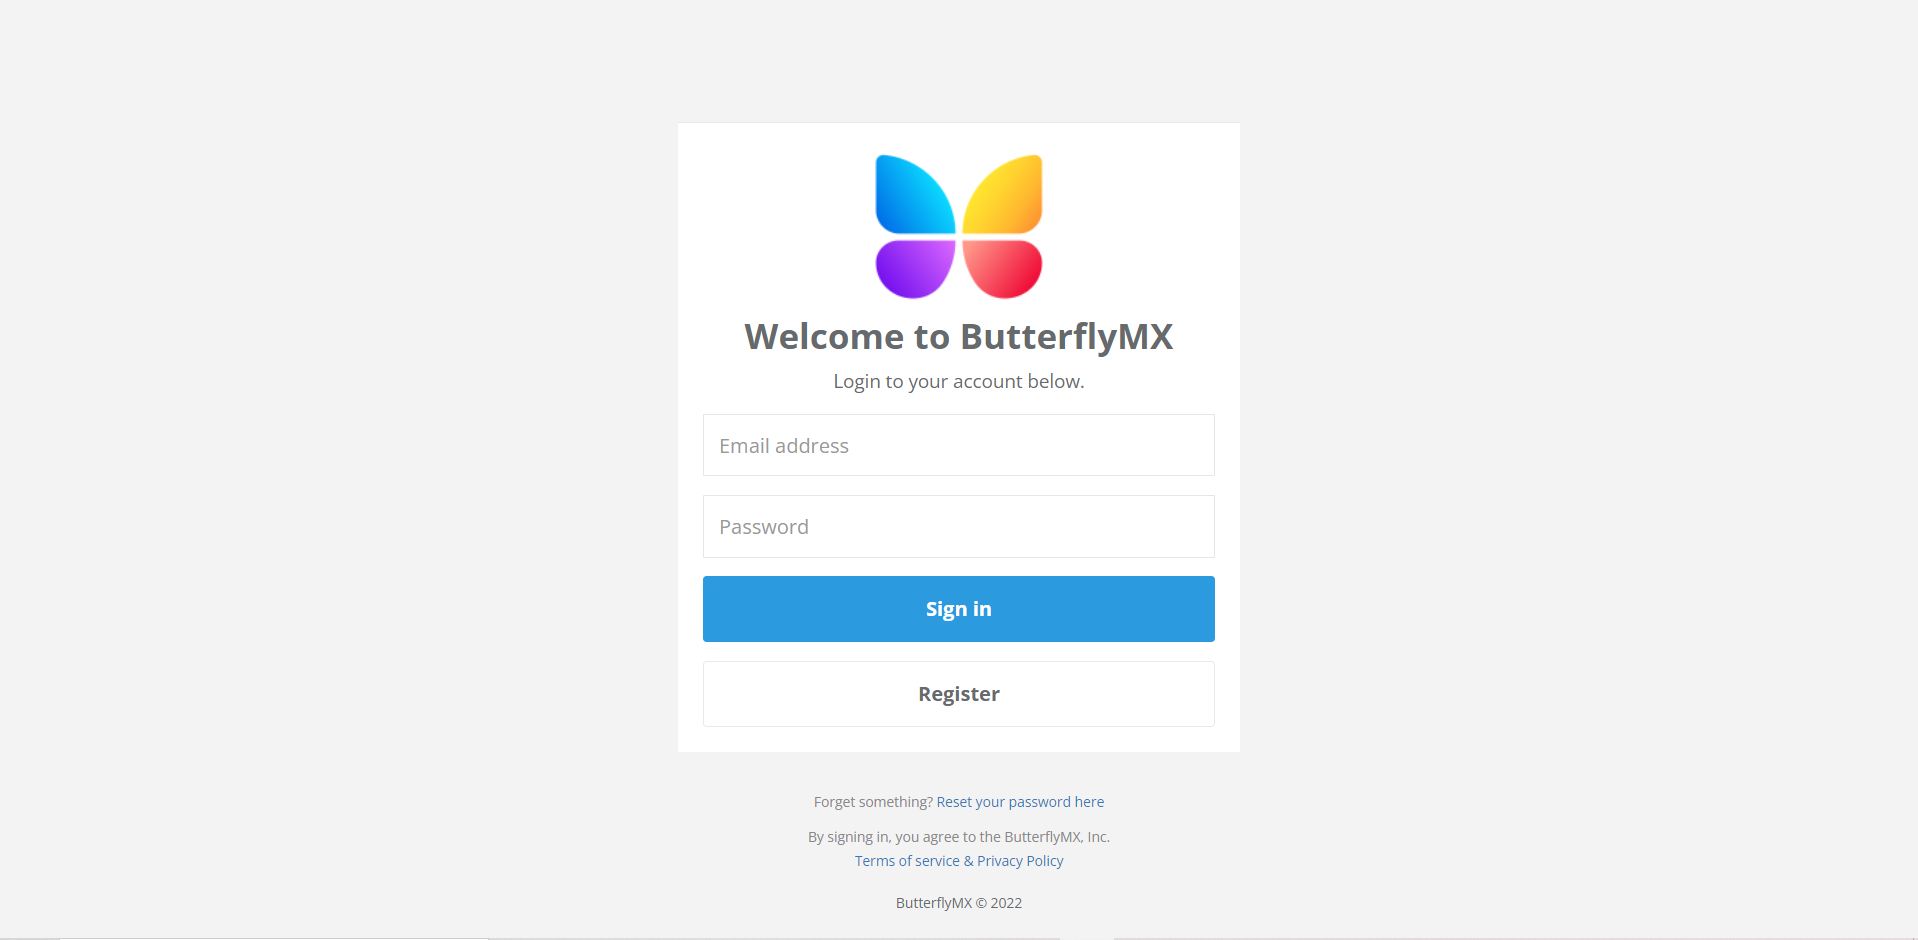 Log in to the ButterflyMX OS